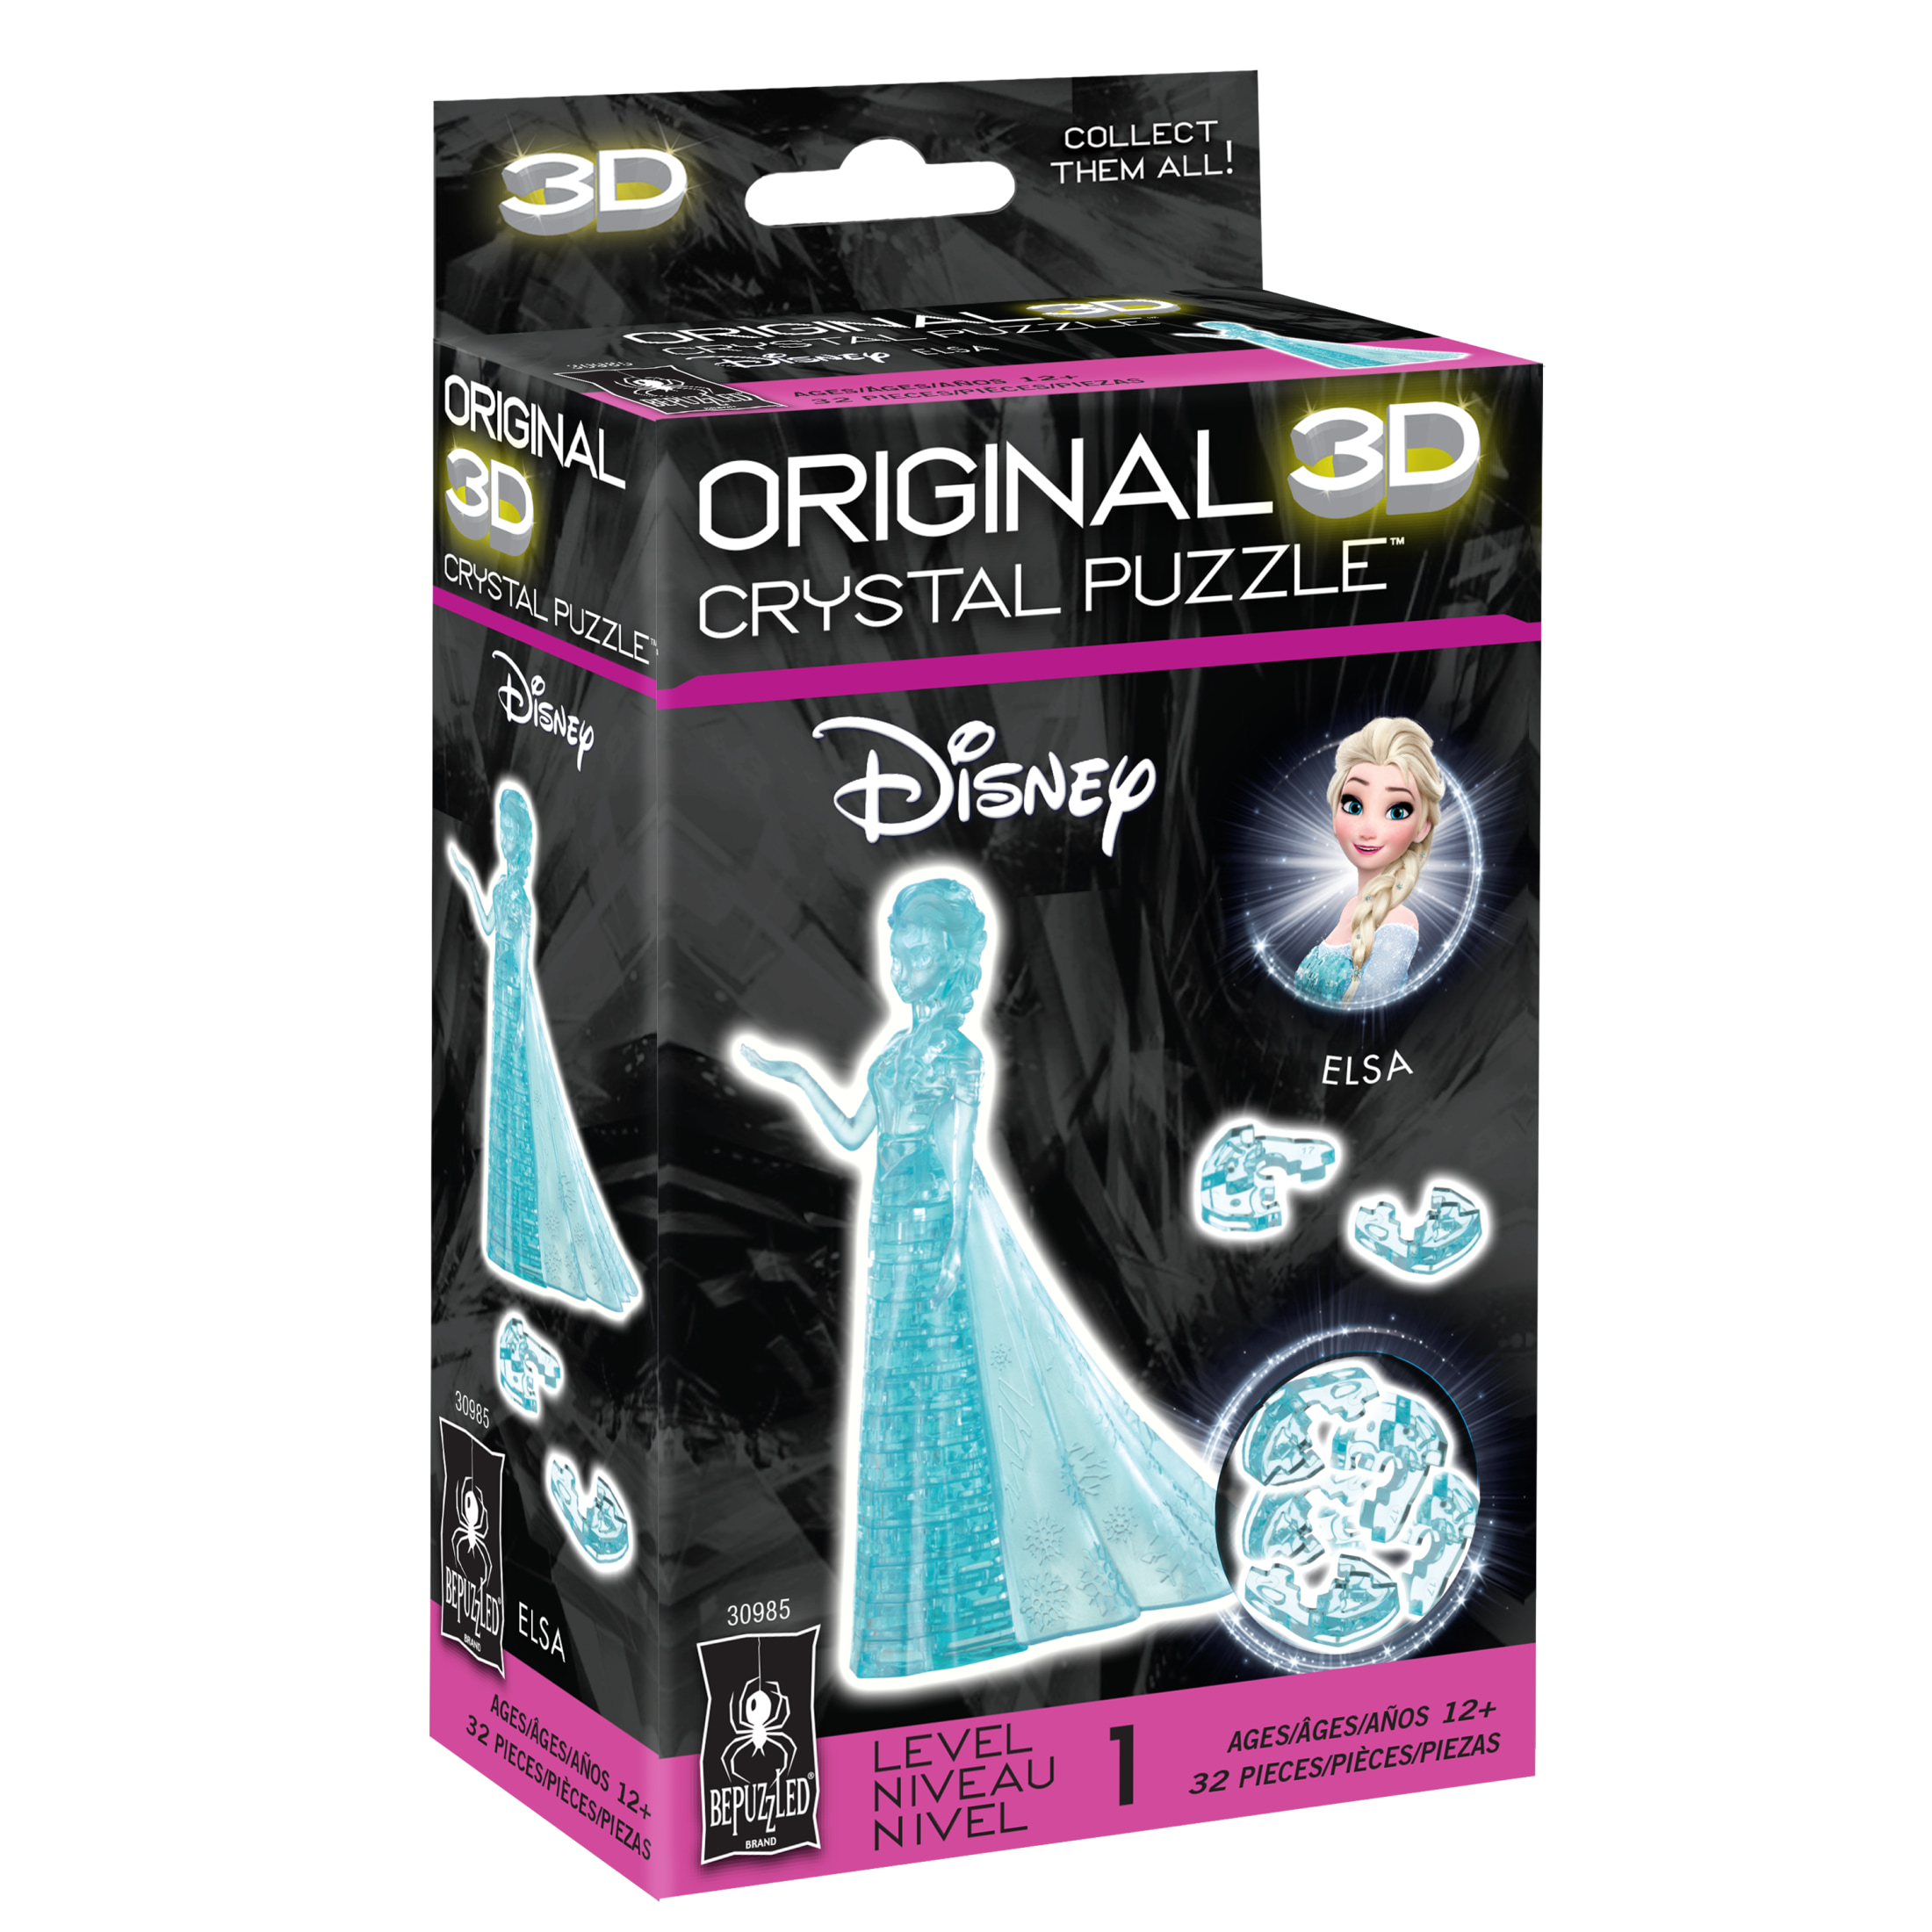 Disney Elsa Original 3D Crystal Puzzle from BePuzzled, Ages 12 and Up - image 5 of 5